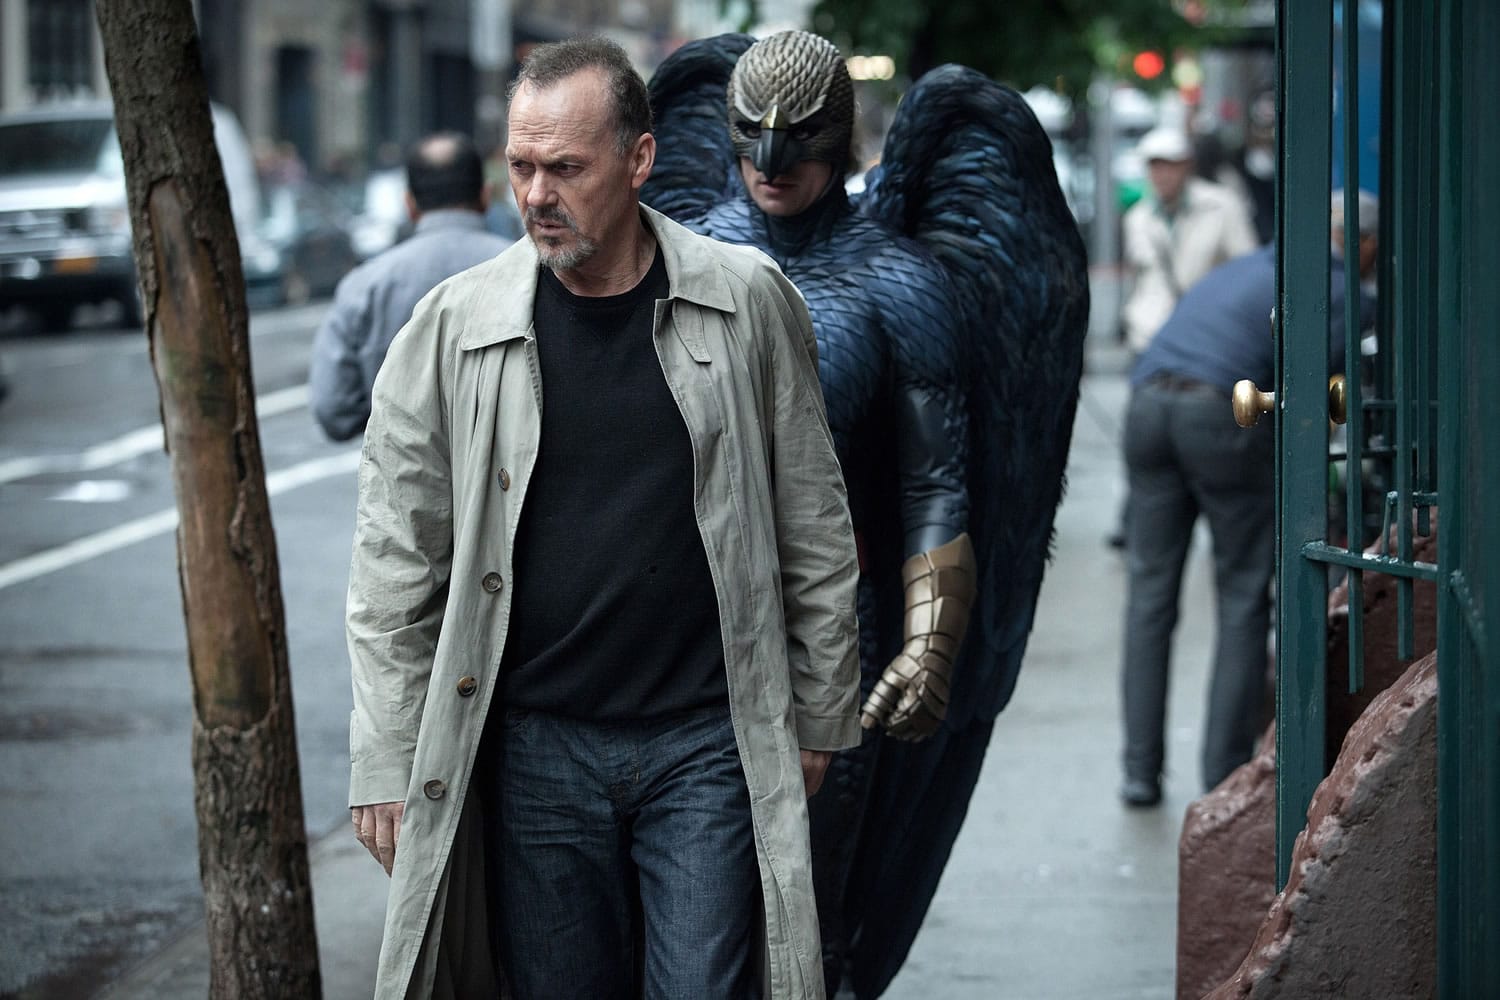 Fox Searchlight files
Michael Keaton, left, stars in &quot;Birdman.&quot; The film is one of few independent movies that have captured the attention of Academy Awards judges, beating big-budget fare.